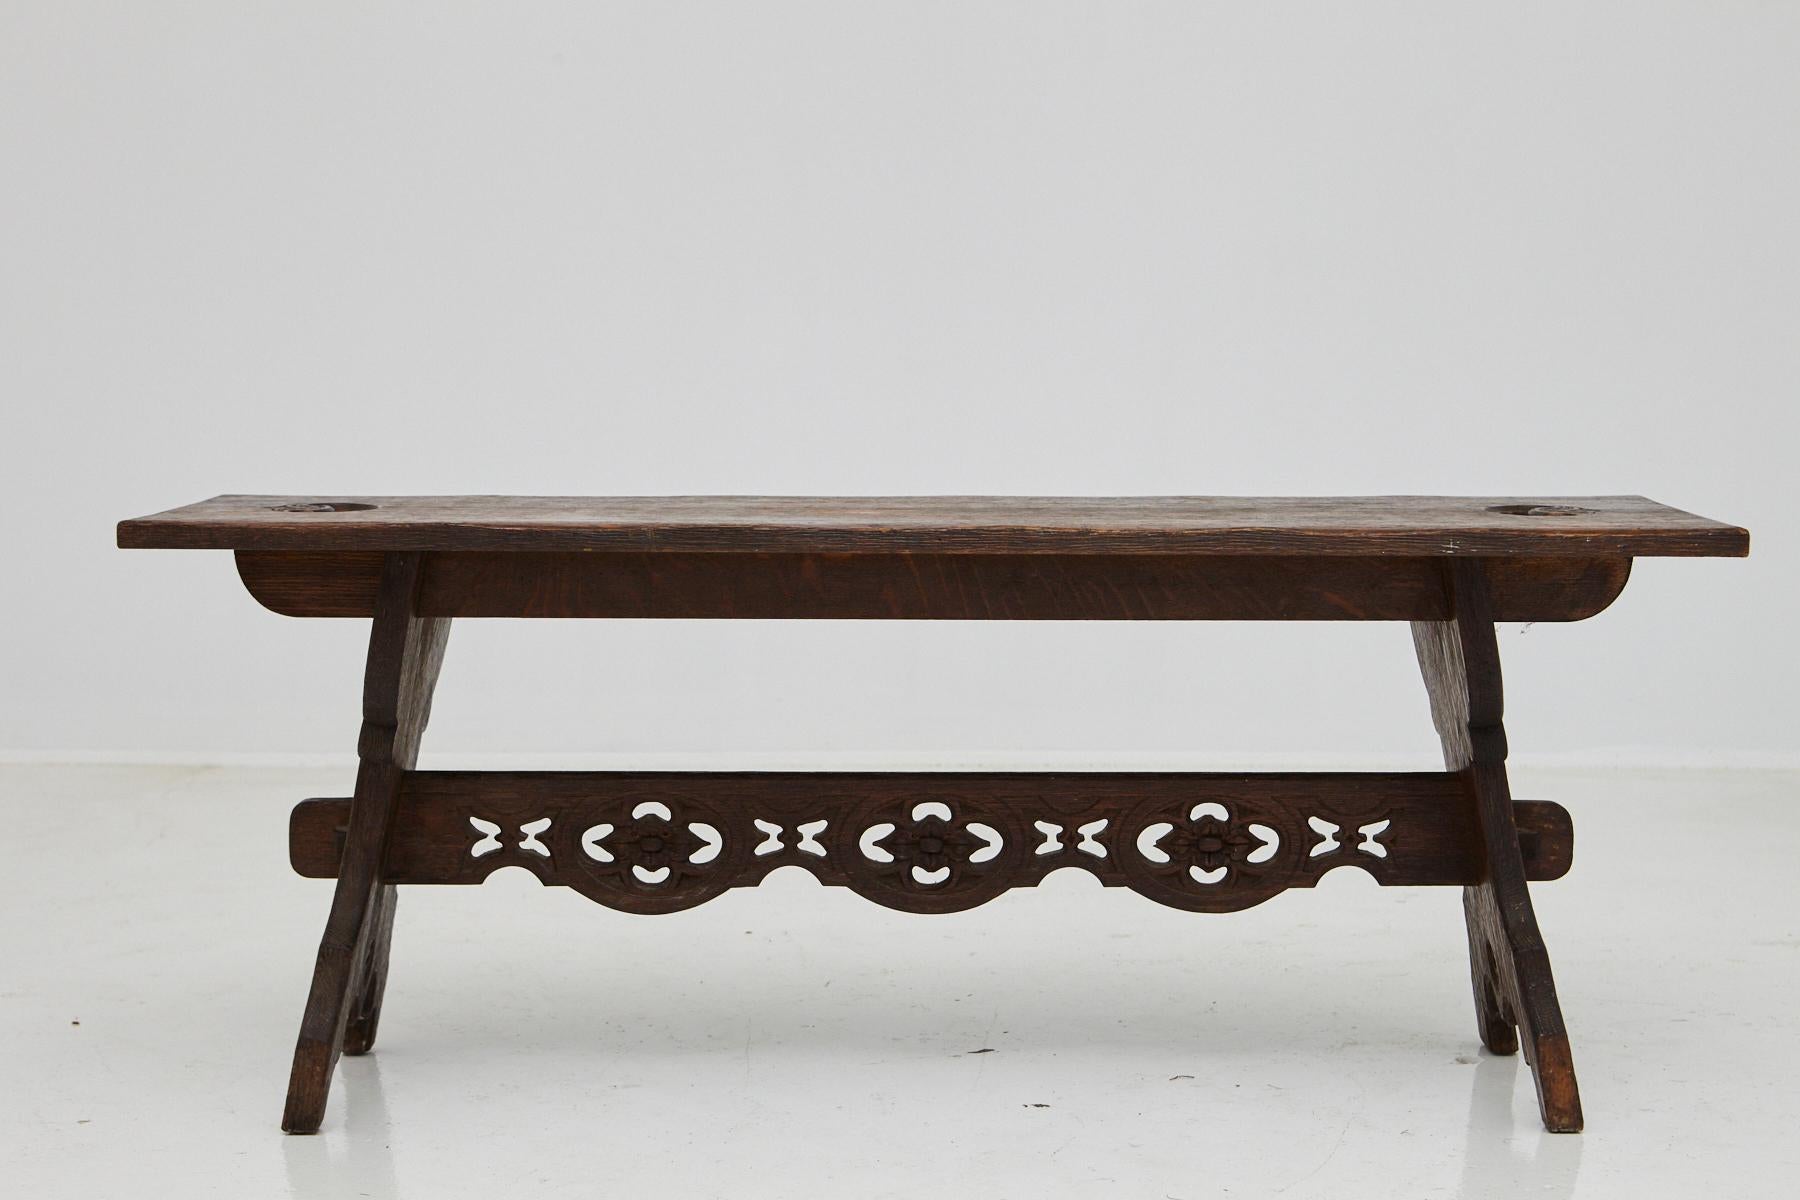 19th century Austrian hand carved rustic trestle oak bench, with carved details in the trestle and two carved handles at the top of the bench.
Very good condition, normal scratches from usage, great patina.